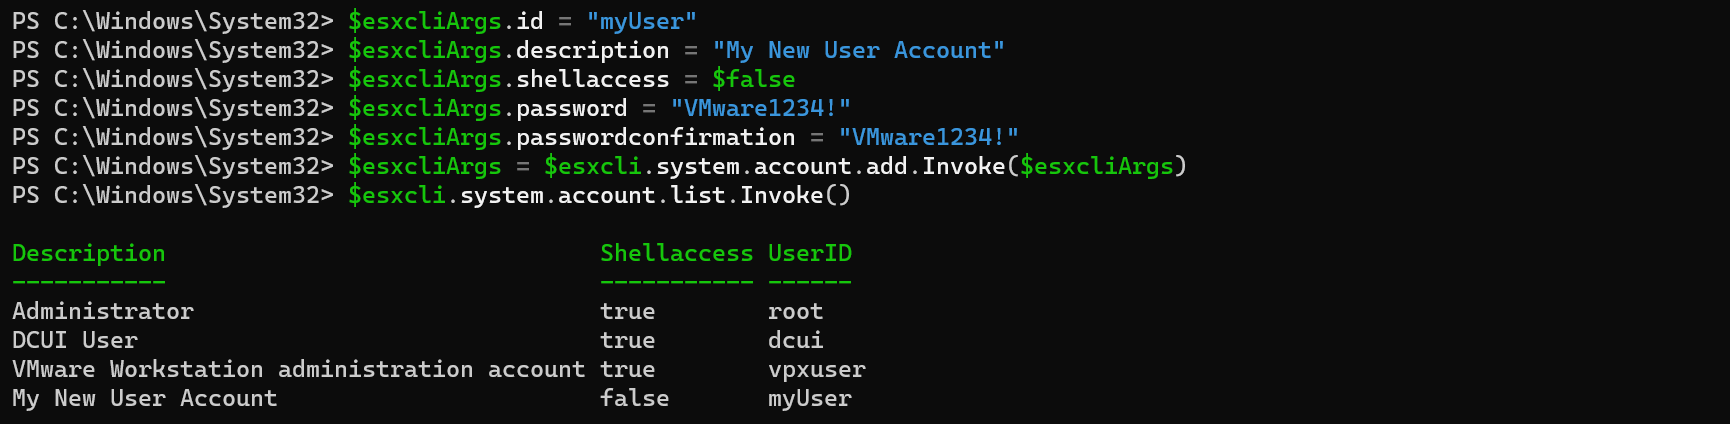 Screenshot showing the esxcli commands to create a new user account and list all user accounts to verify success